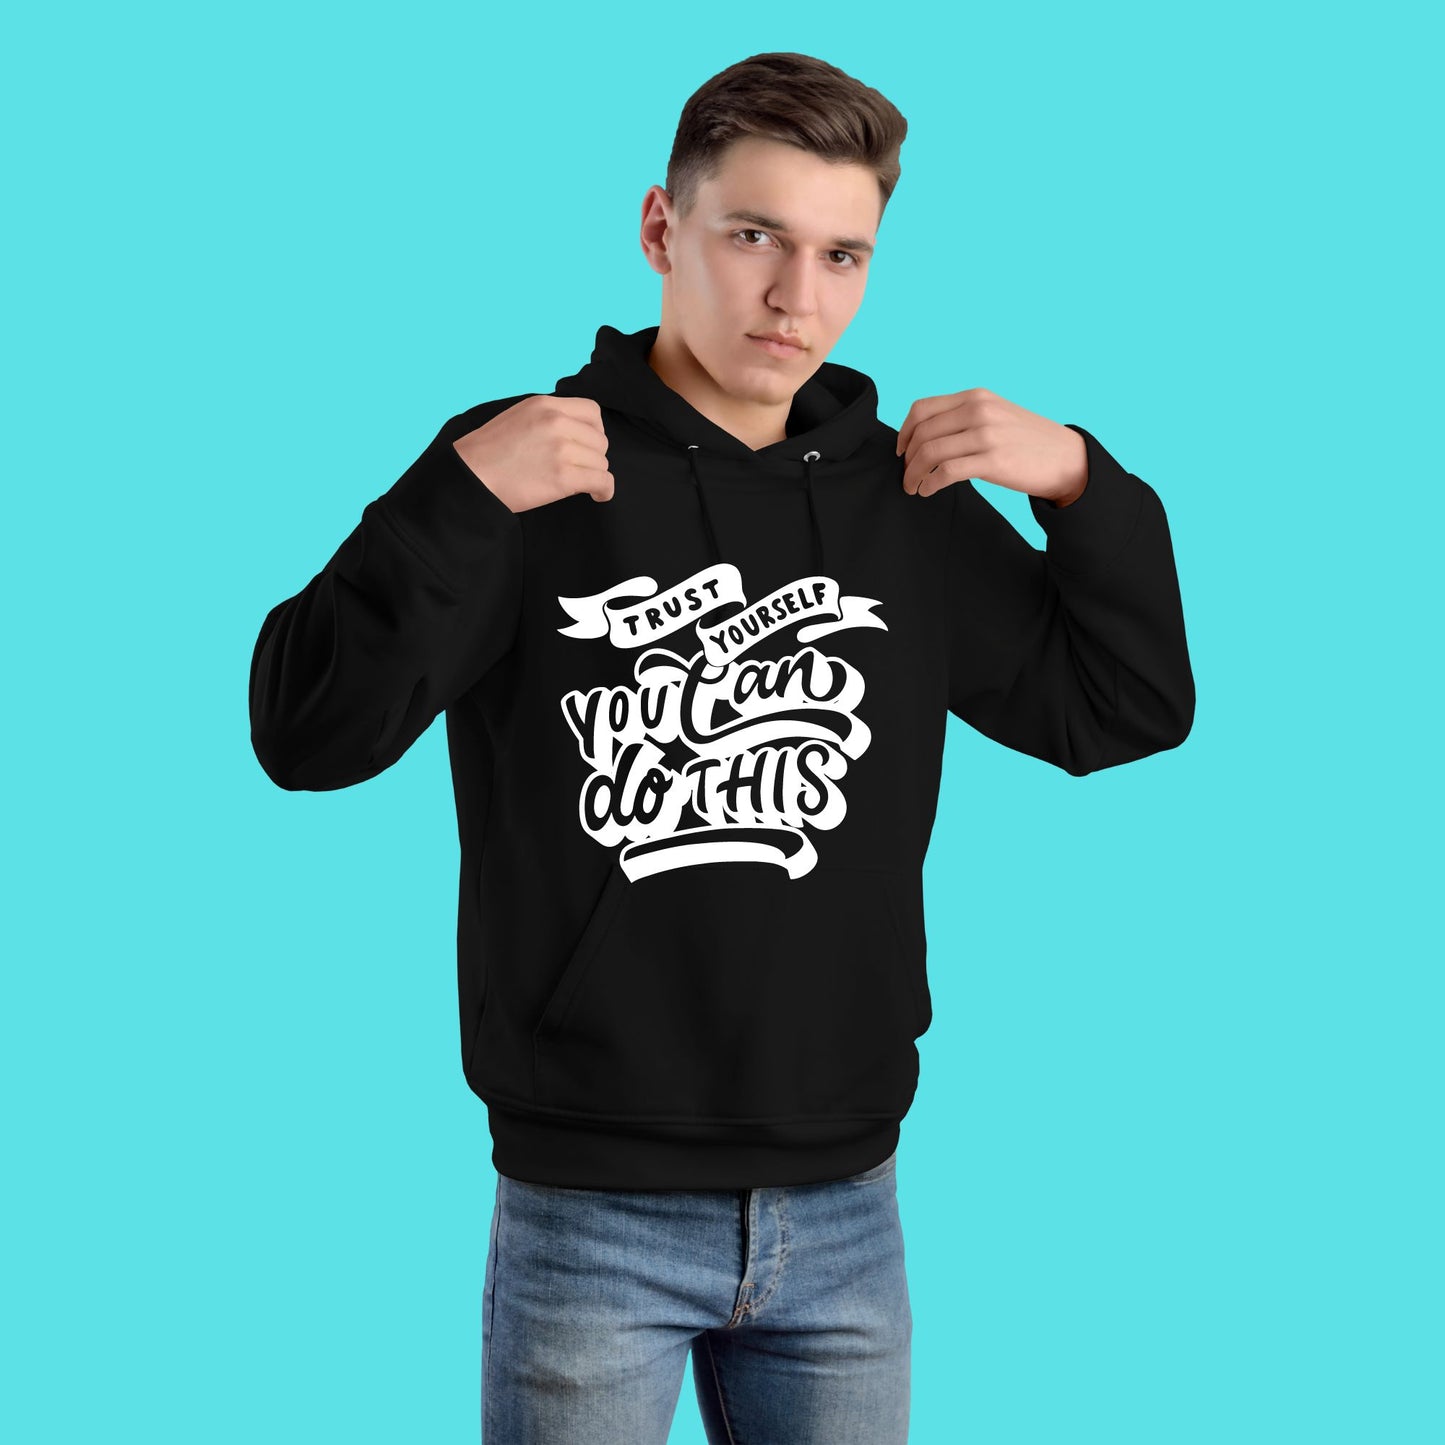 Motivational Unisex Graphic Hoodie. Fall and Winter Wear